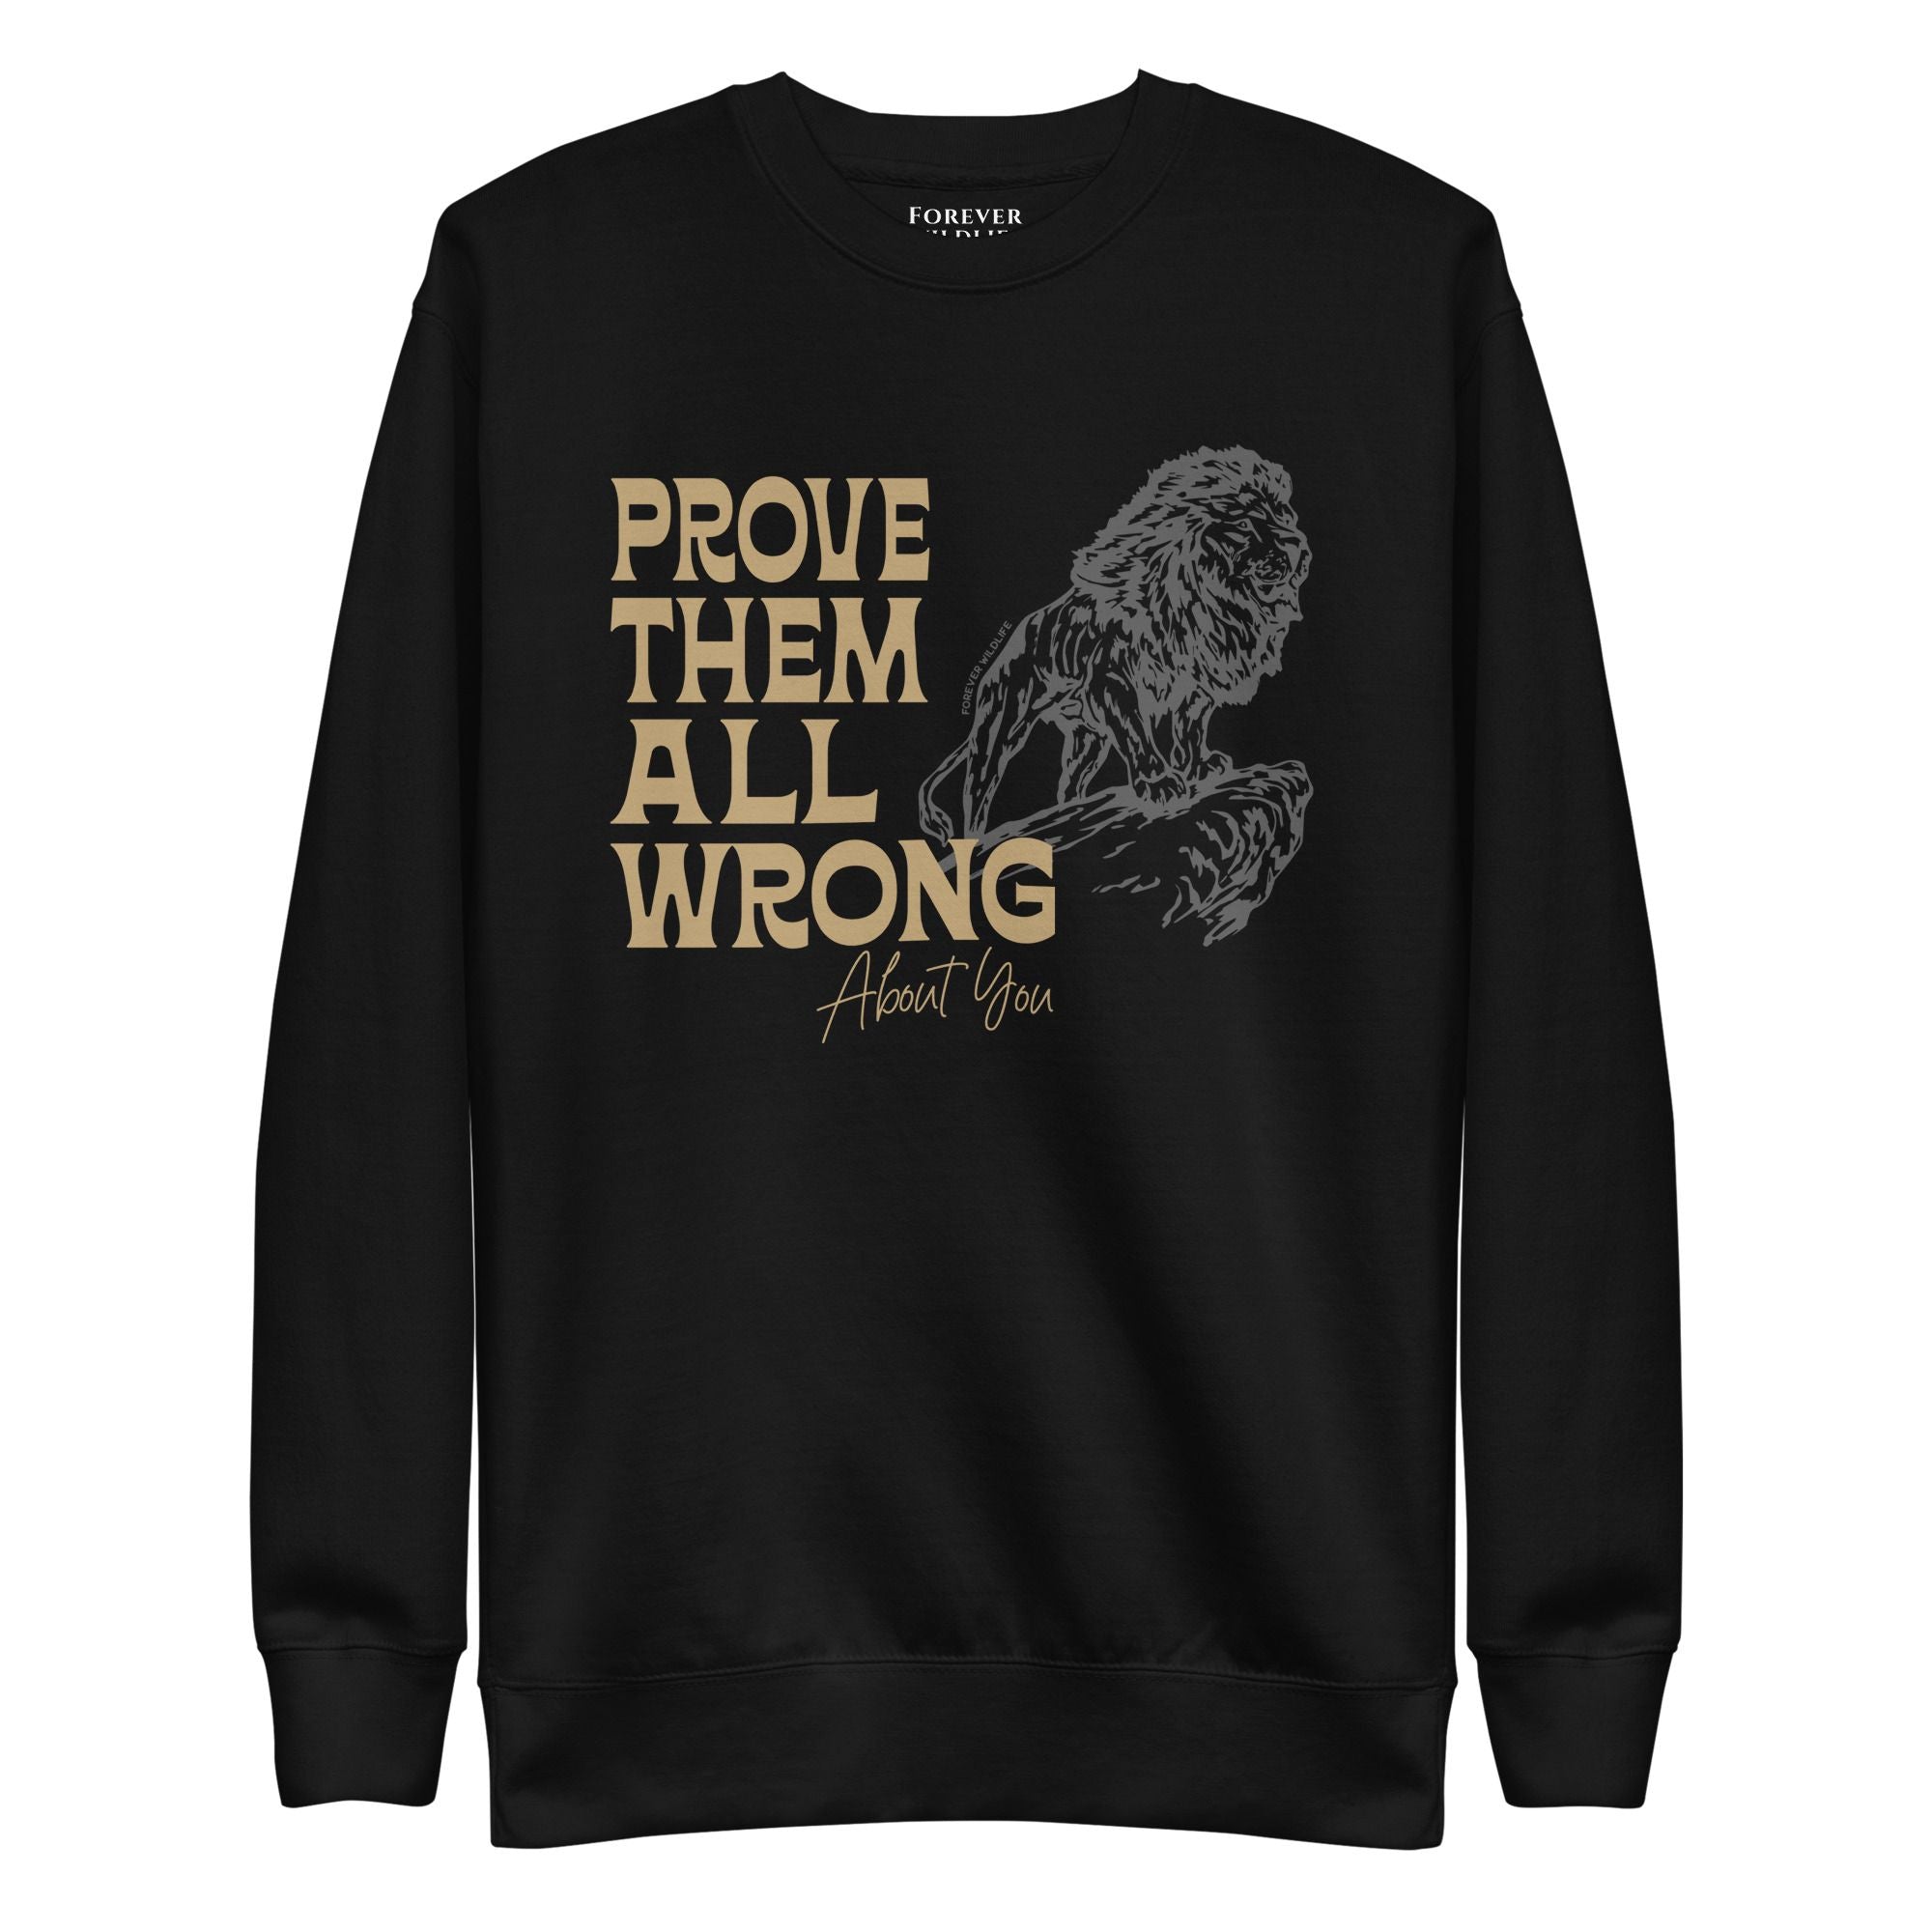 Lion Sweatshirt in Black-Premium Wildlife Animal Inspiration Sweatshirt Design with 'Prove Them All Wrong About You' text, part of Wildlife Sweatshirts & Clothing from Forever Wildlife.